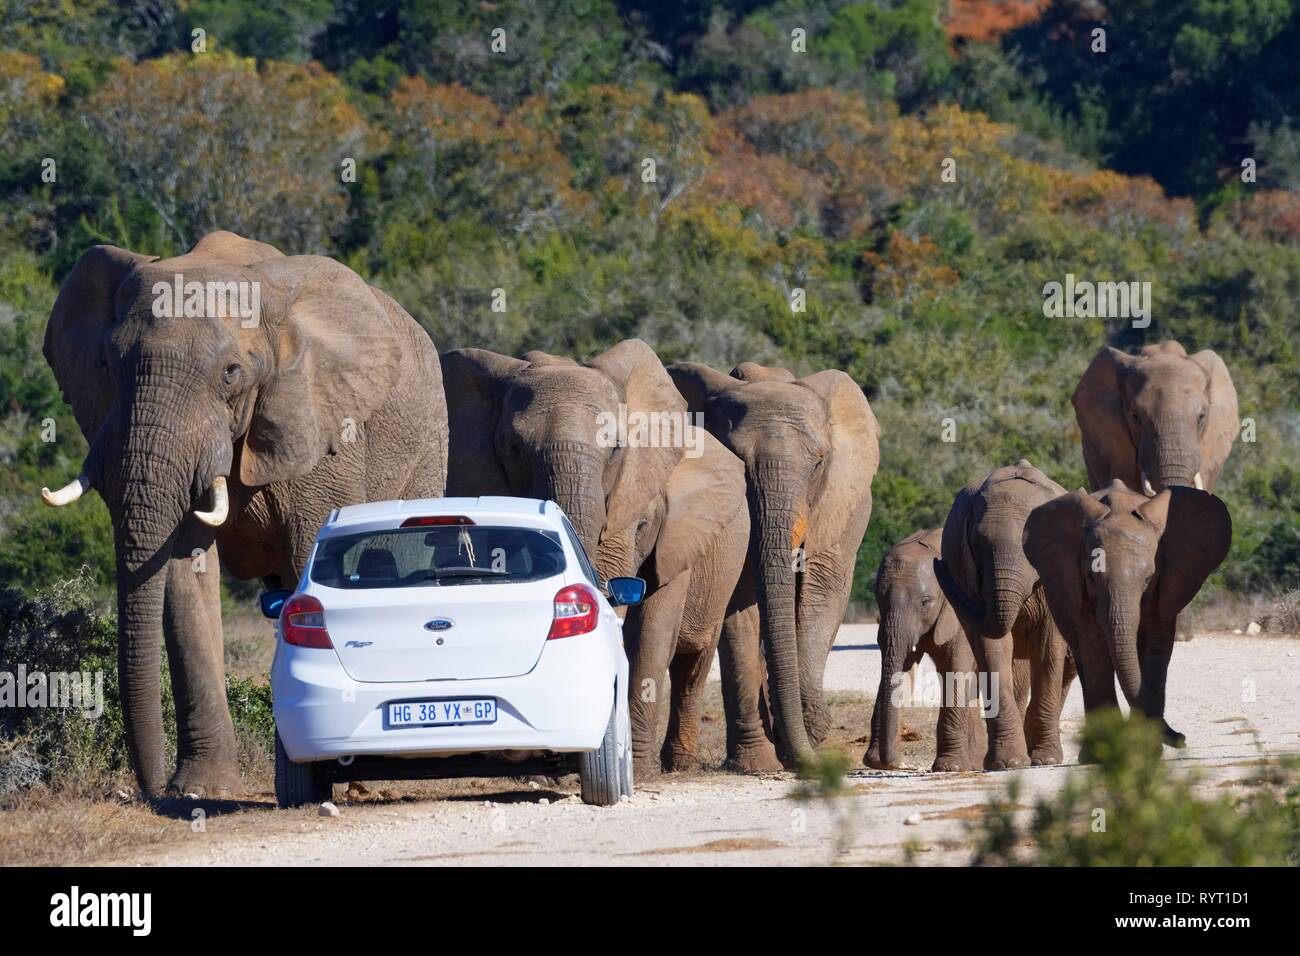 African bush elephants (Loxodonta africana), herd with calves walking, a tourist car stopped on the side of a dirt road Stock Photo